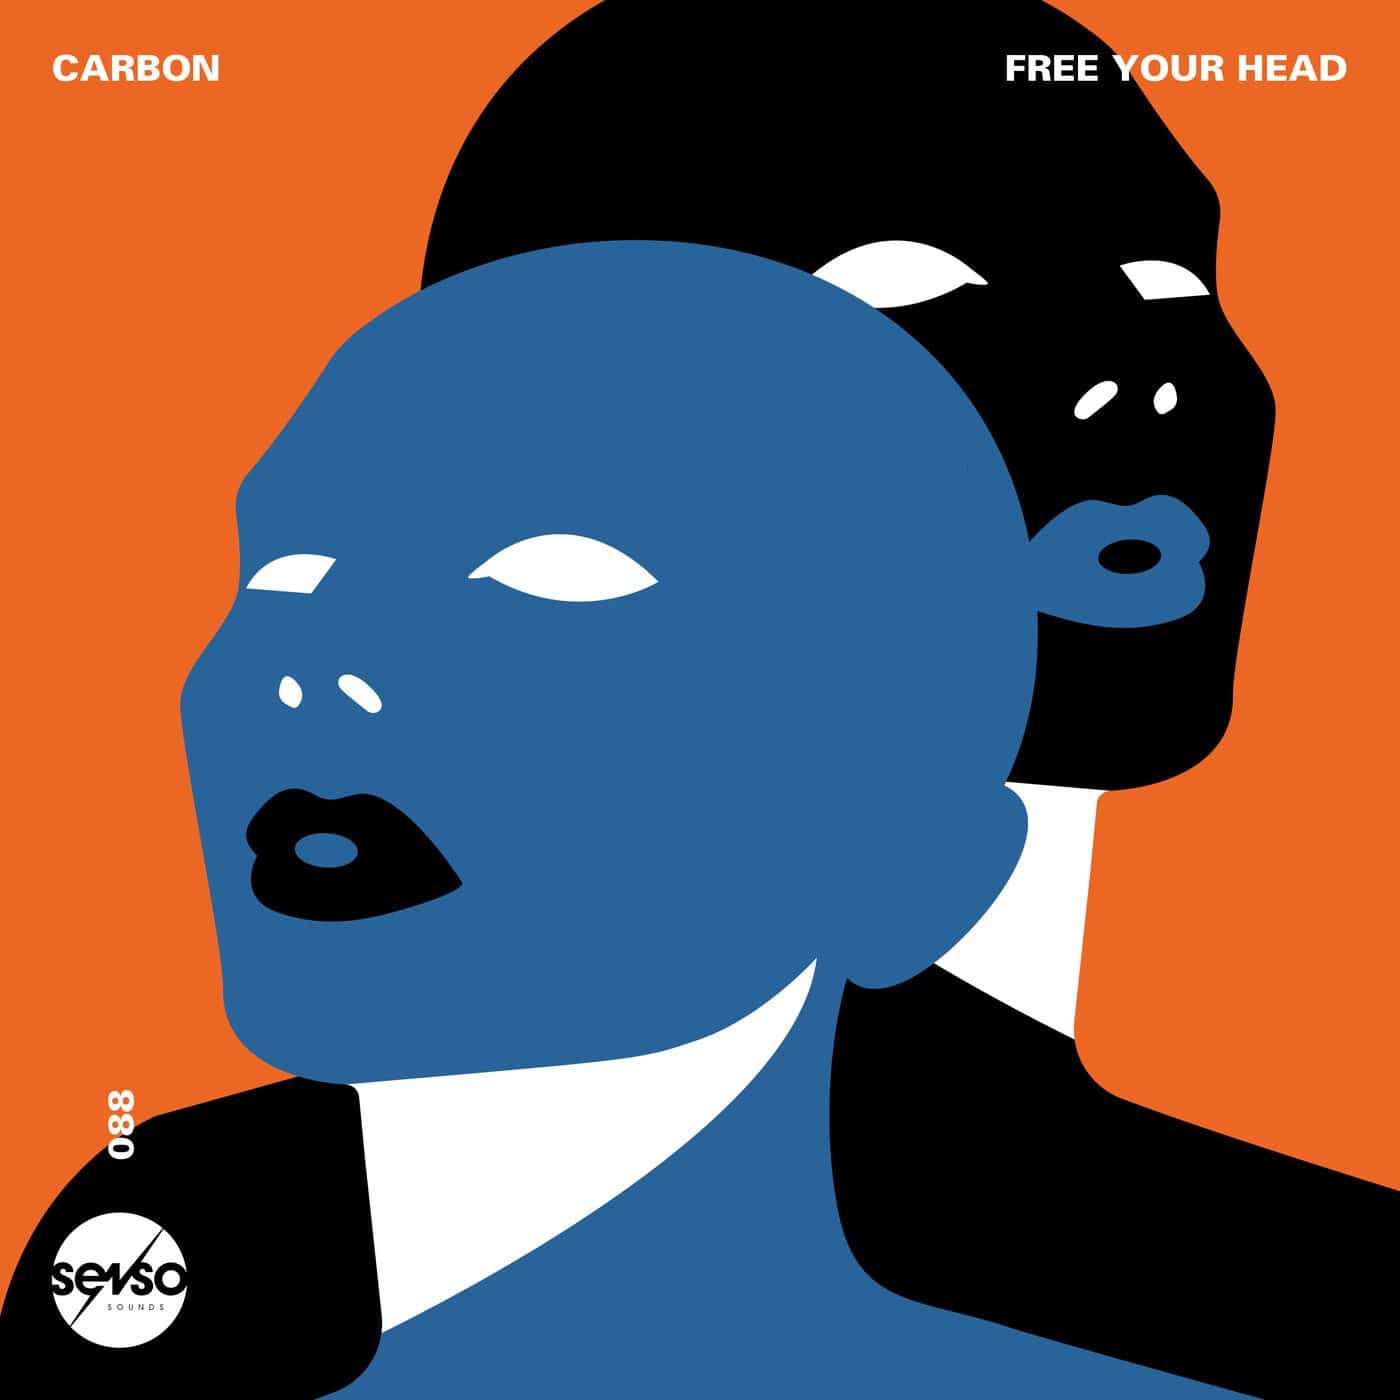 image cover: Carbon - Free Your Head / SENSO088